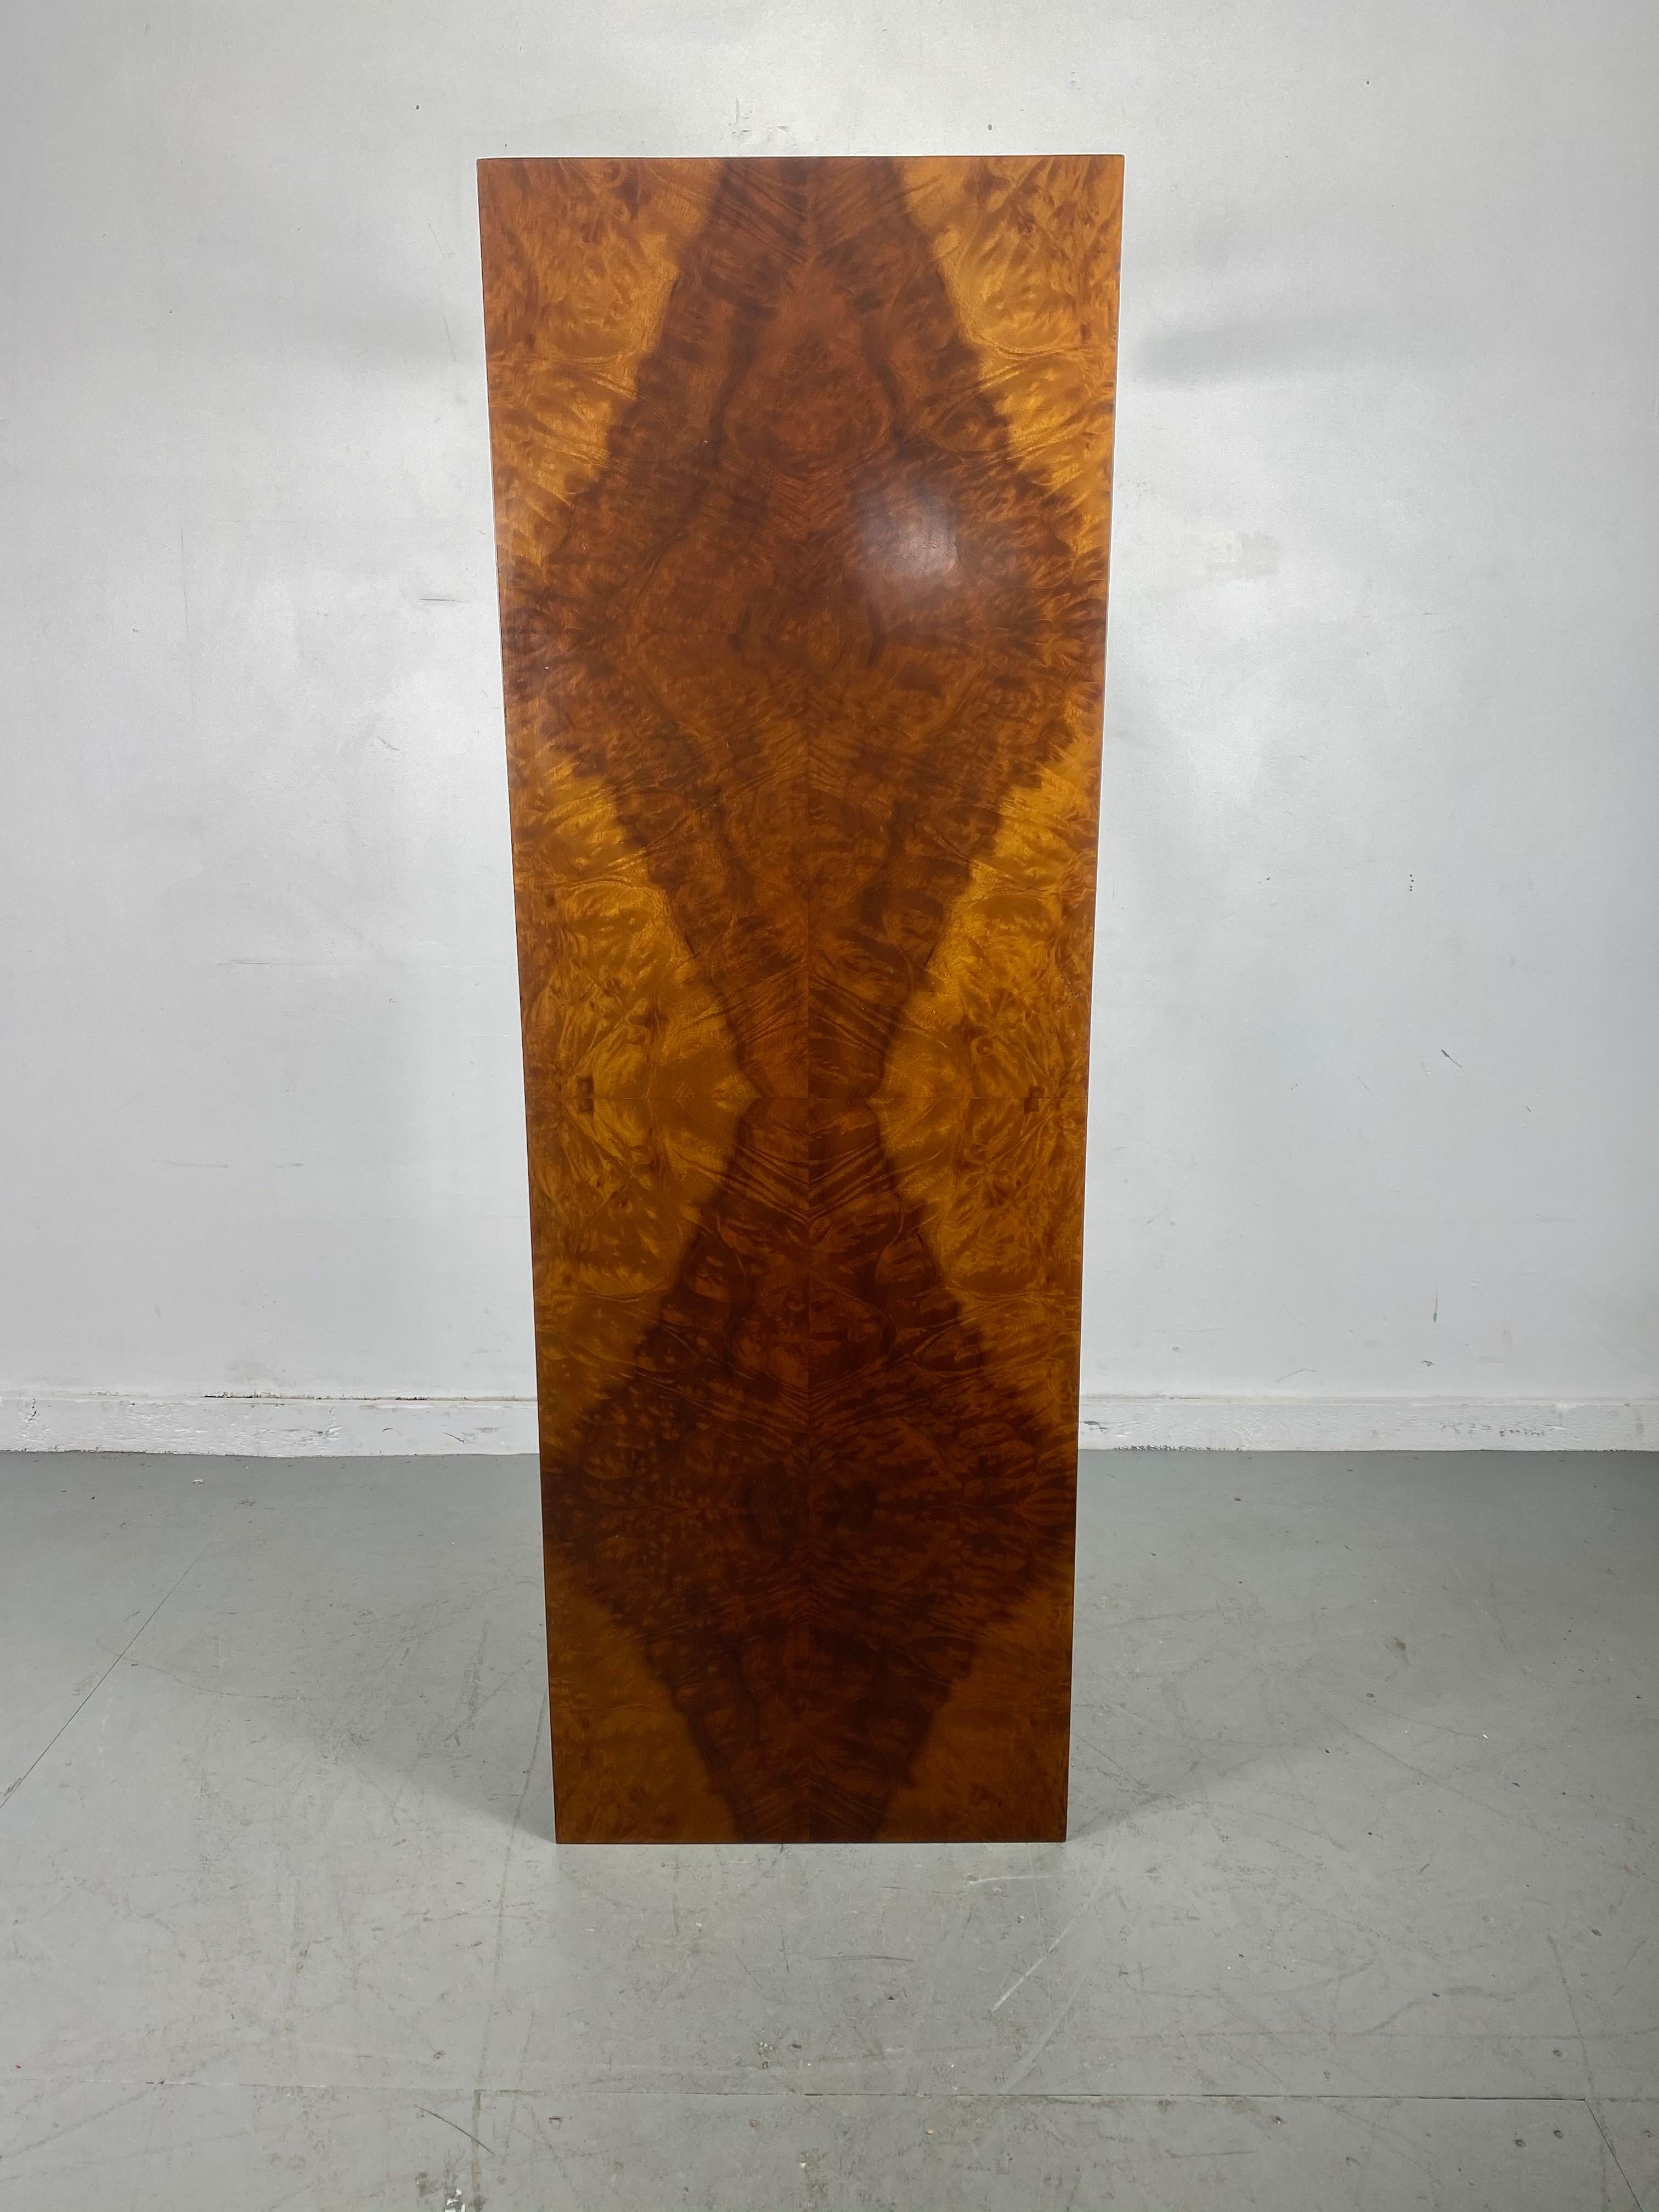 Stunning Book-matched Burl Walnut Console by Milo Baughman for Directional,, Sleek , simple ,elegant design,, 1970s Modernist Style,Amazing color ,finish and patina.. Fit seamlessly into any modern ,contemporary, antique ,ecclectic